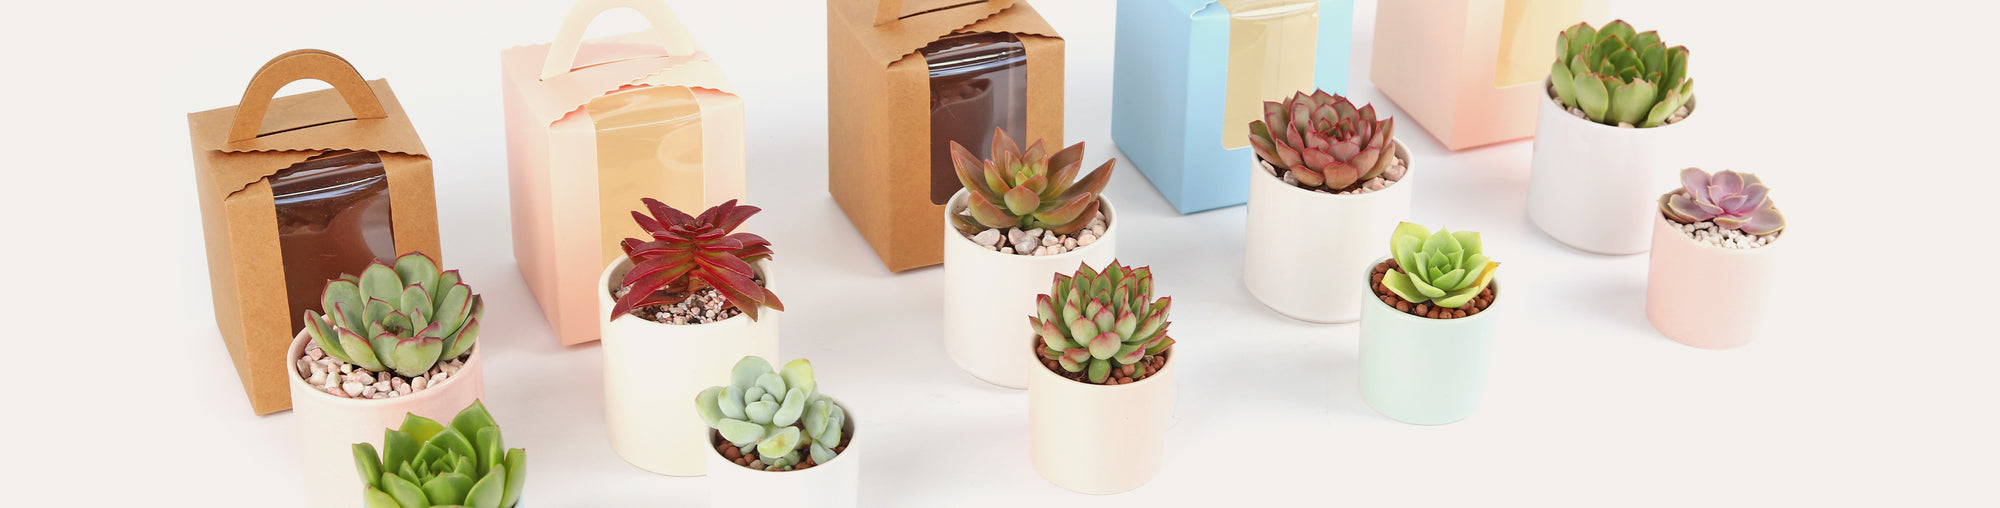 Succulent event gift collection, Succulent wedding gift ideas